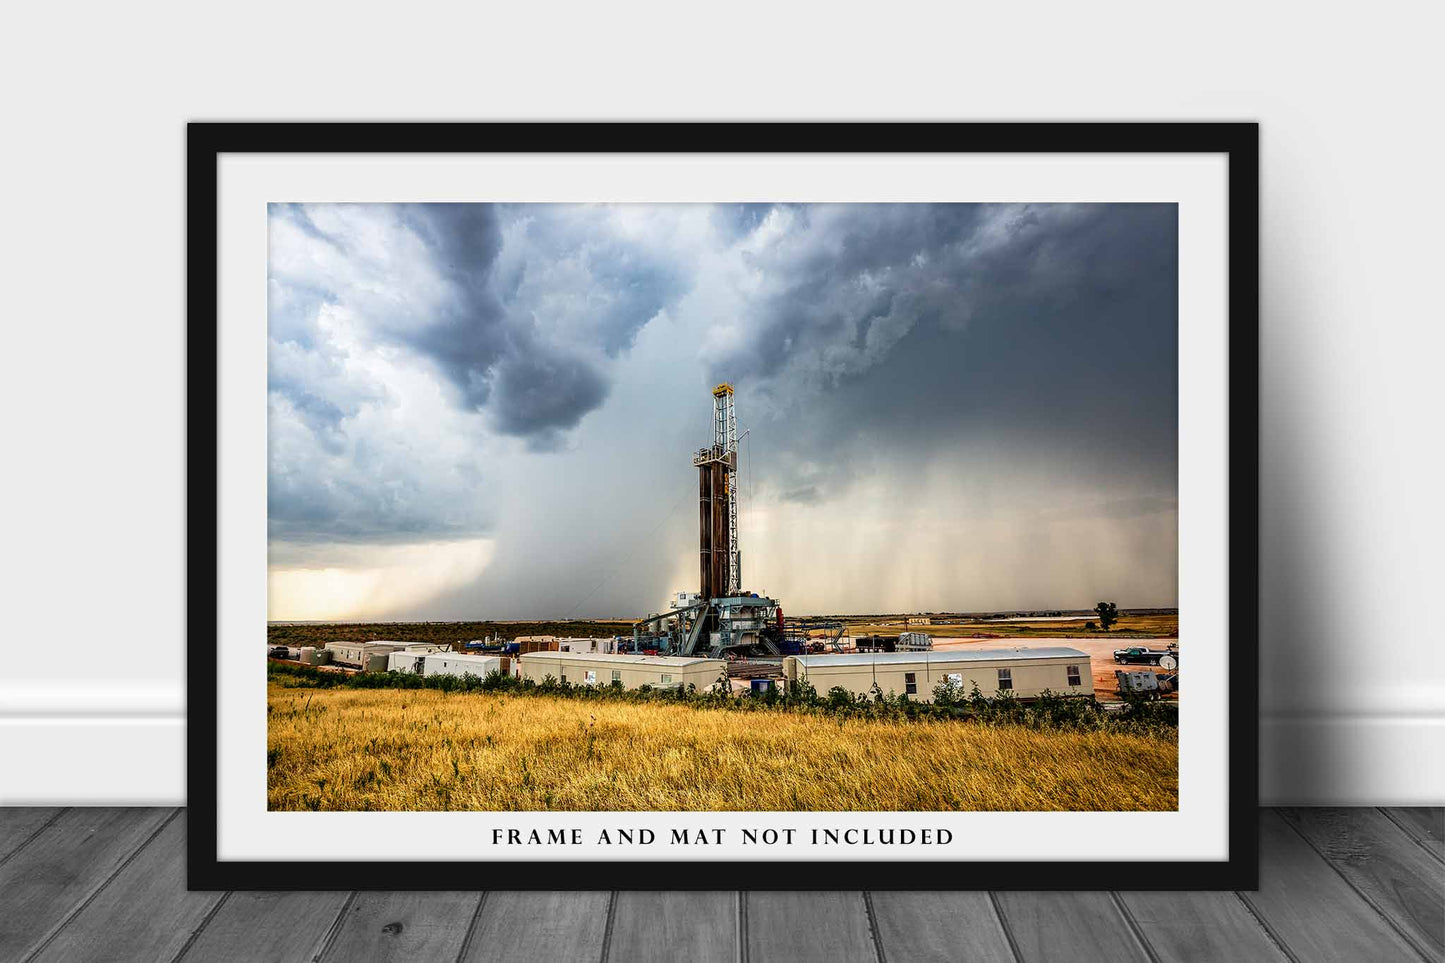 Oilfield Photography Print (Not Framed) Picture of Drilling Rig and Storm On Summer Day in Oklahoma Thunderstorm Wall Art Oil and Gas Decor